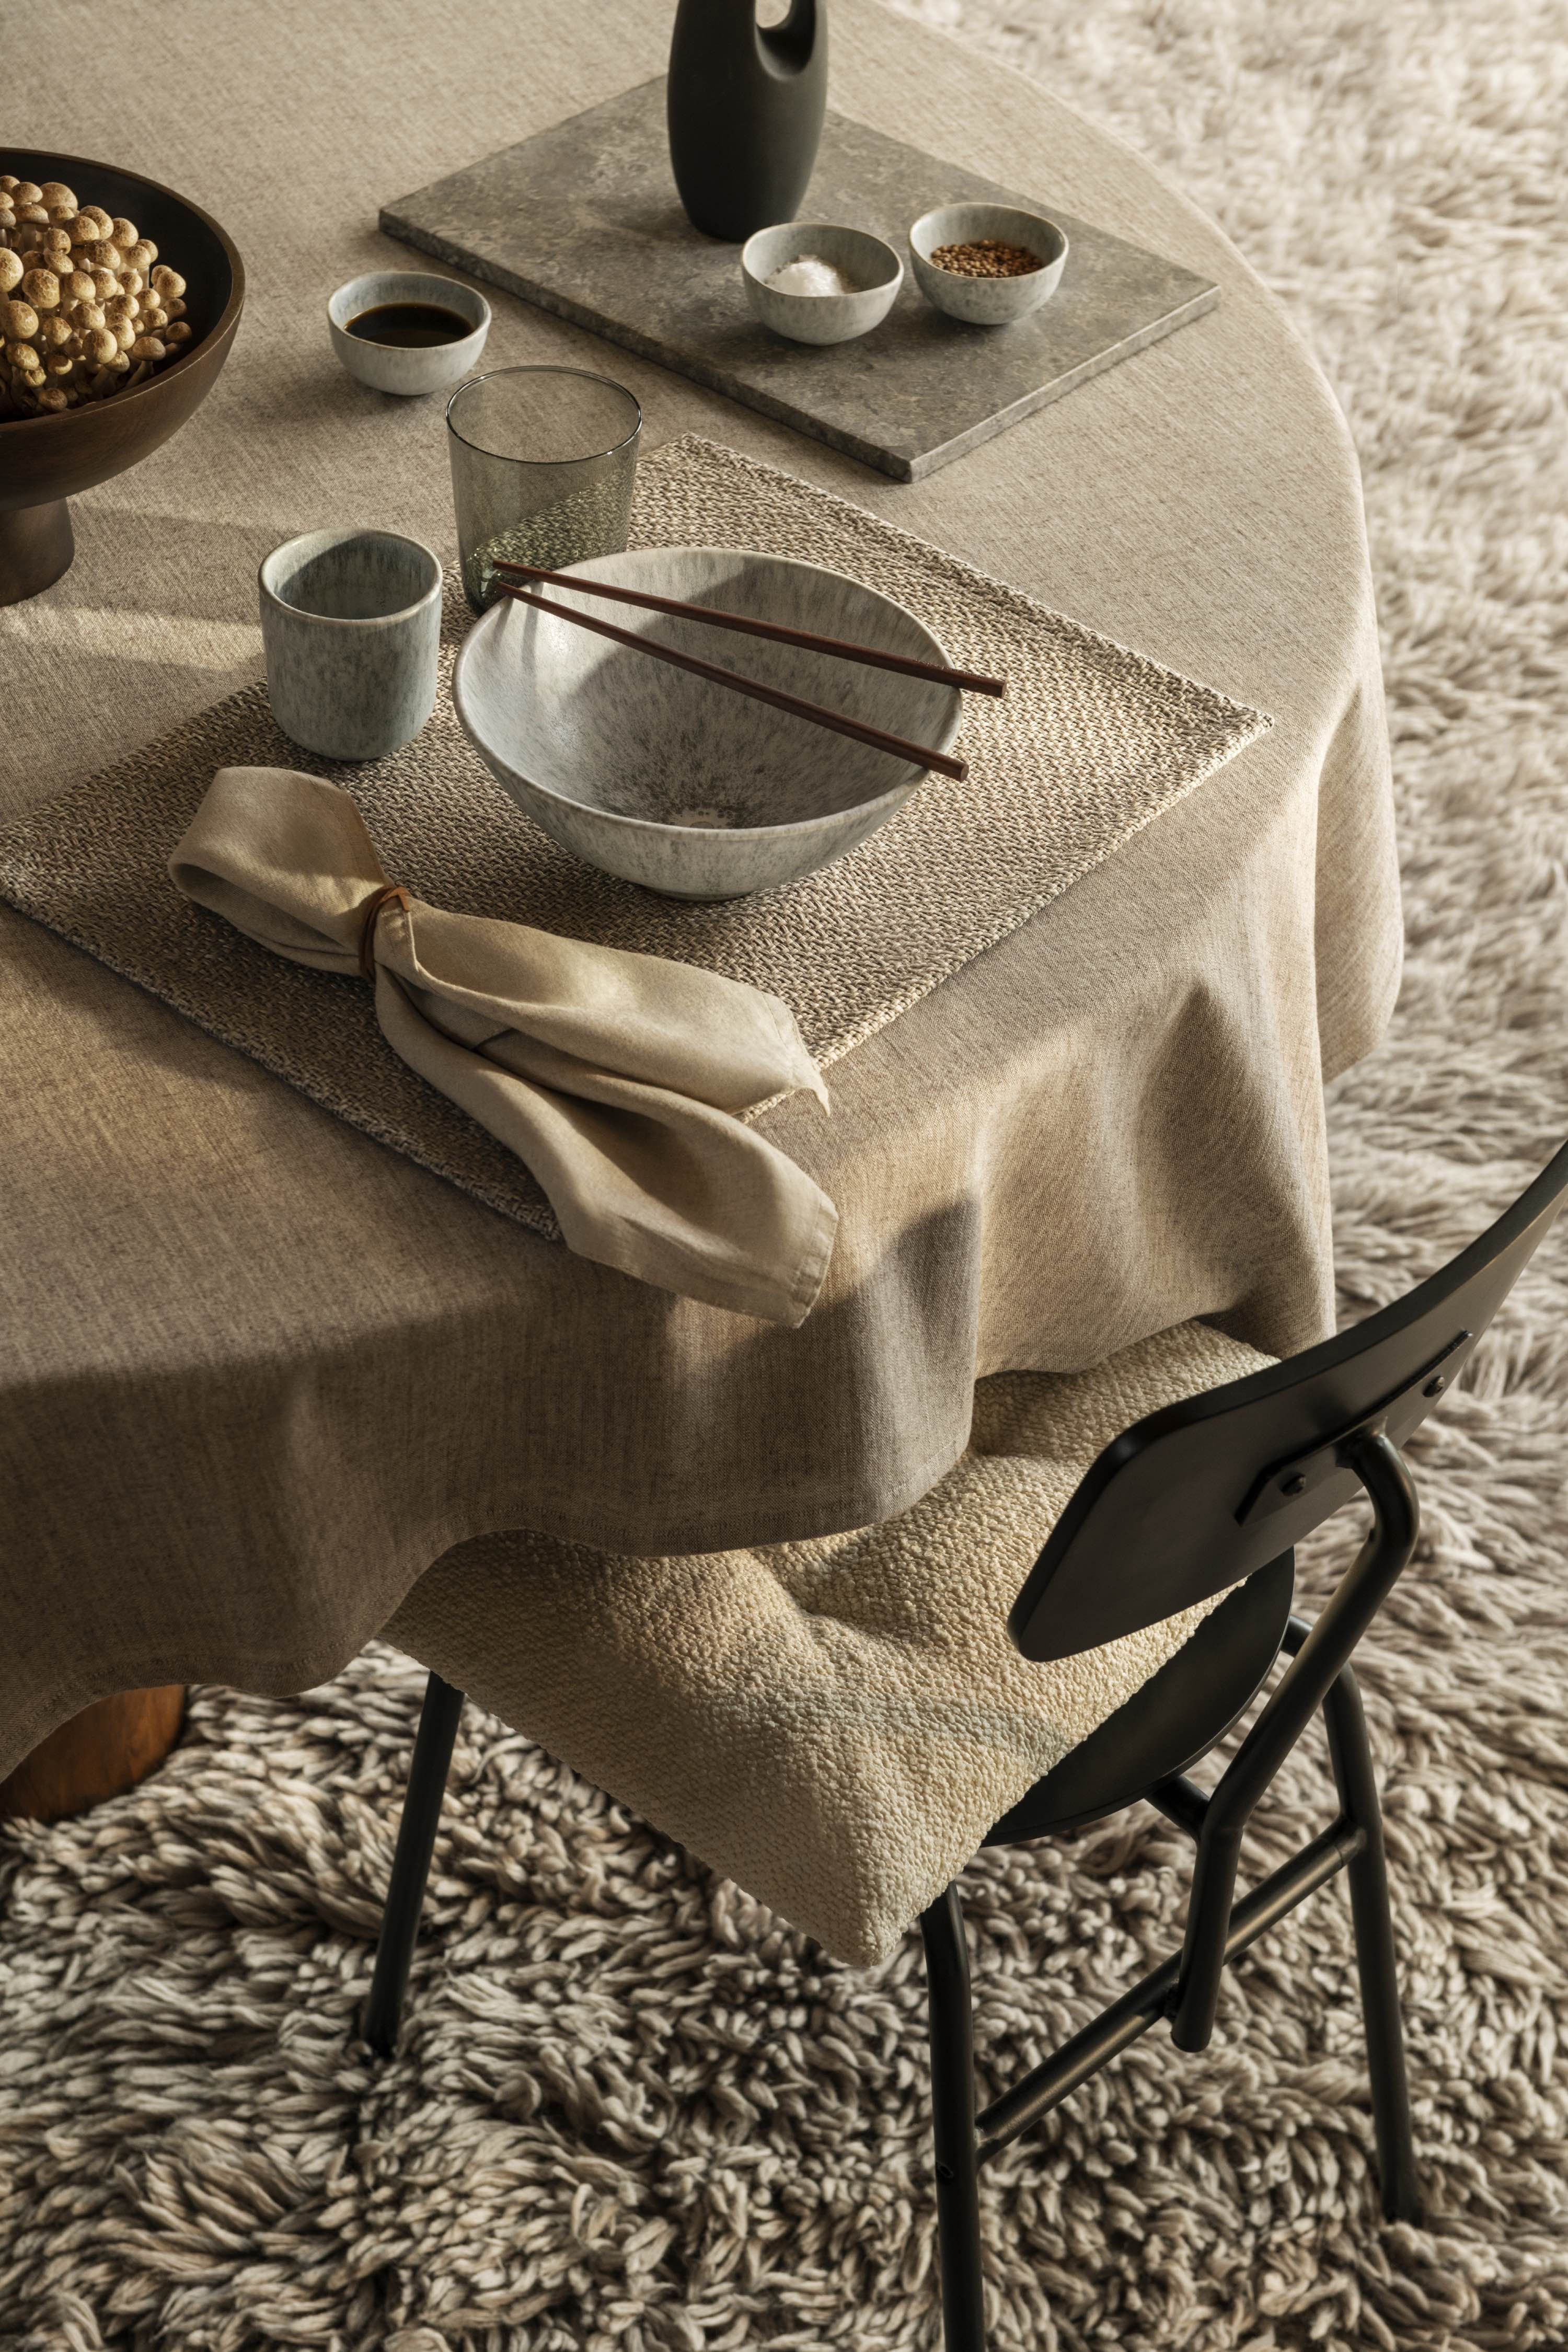 H&M Home launches autumn 2021 collection